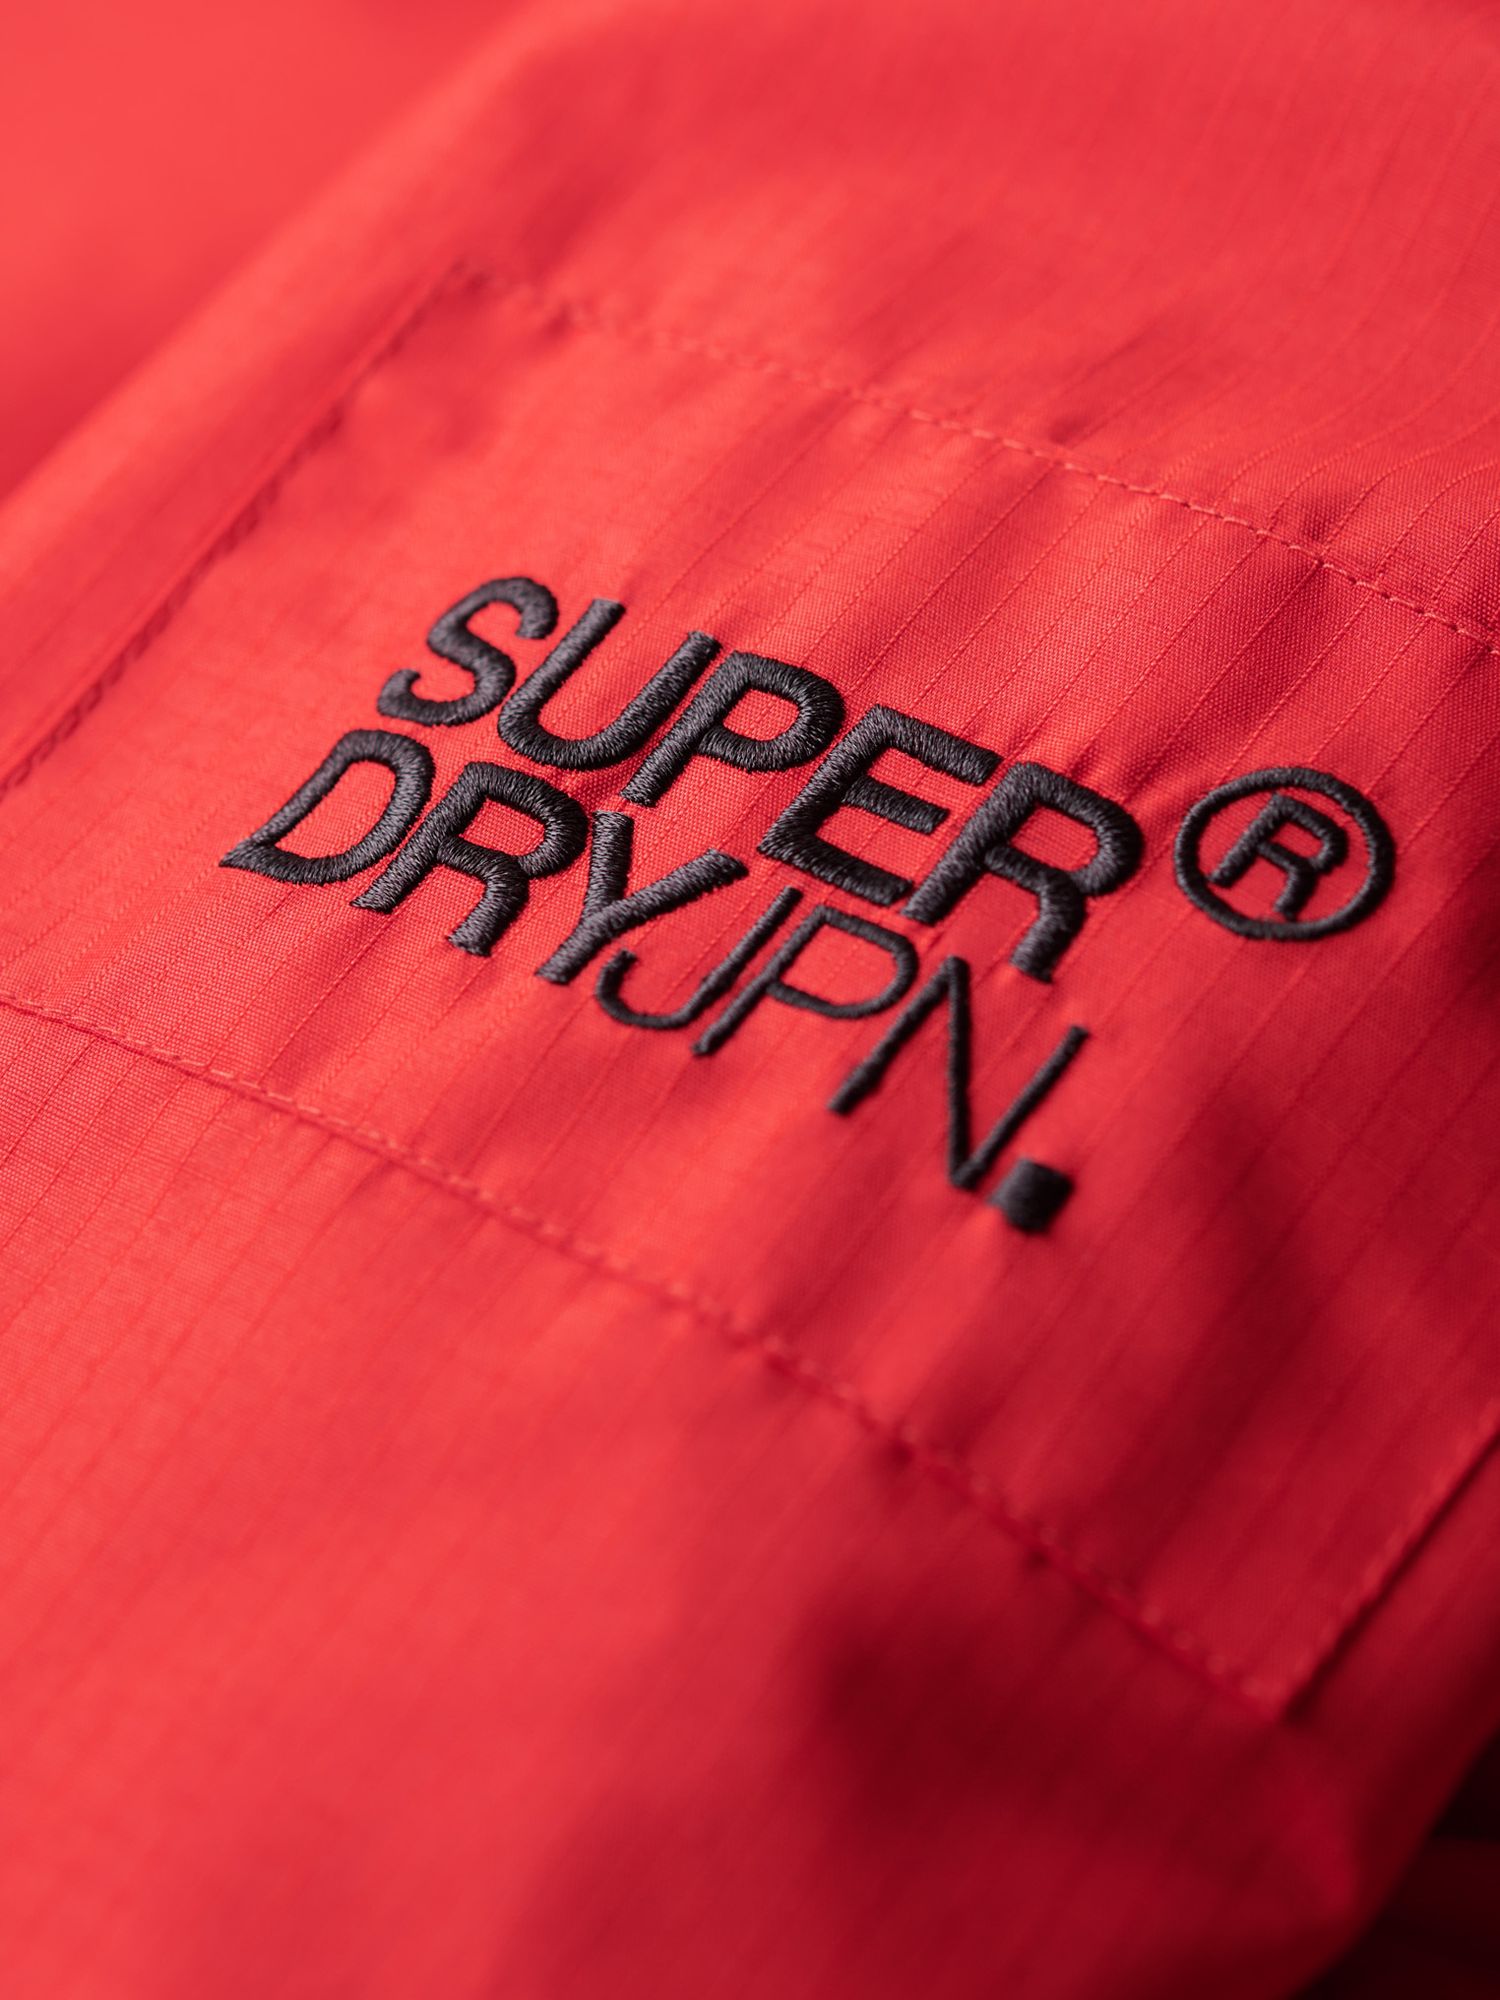 Superdry Mountain SD Windcheater Jacket, Charcoal at John Lewis